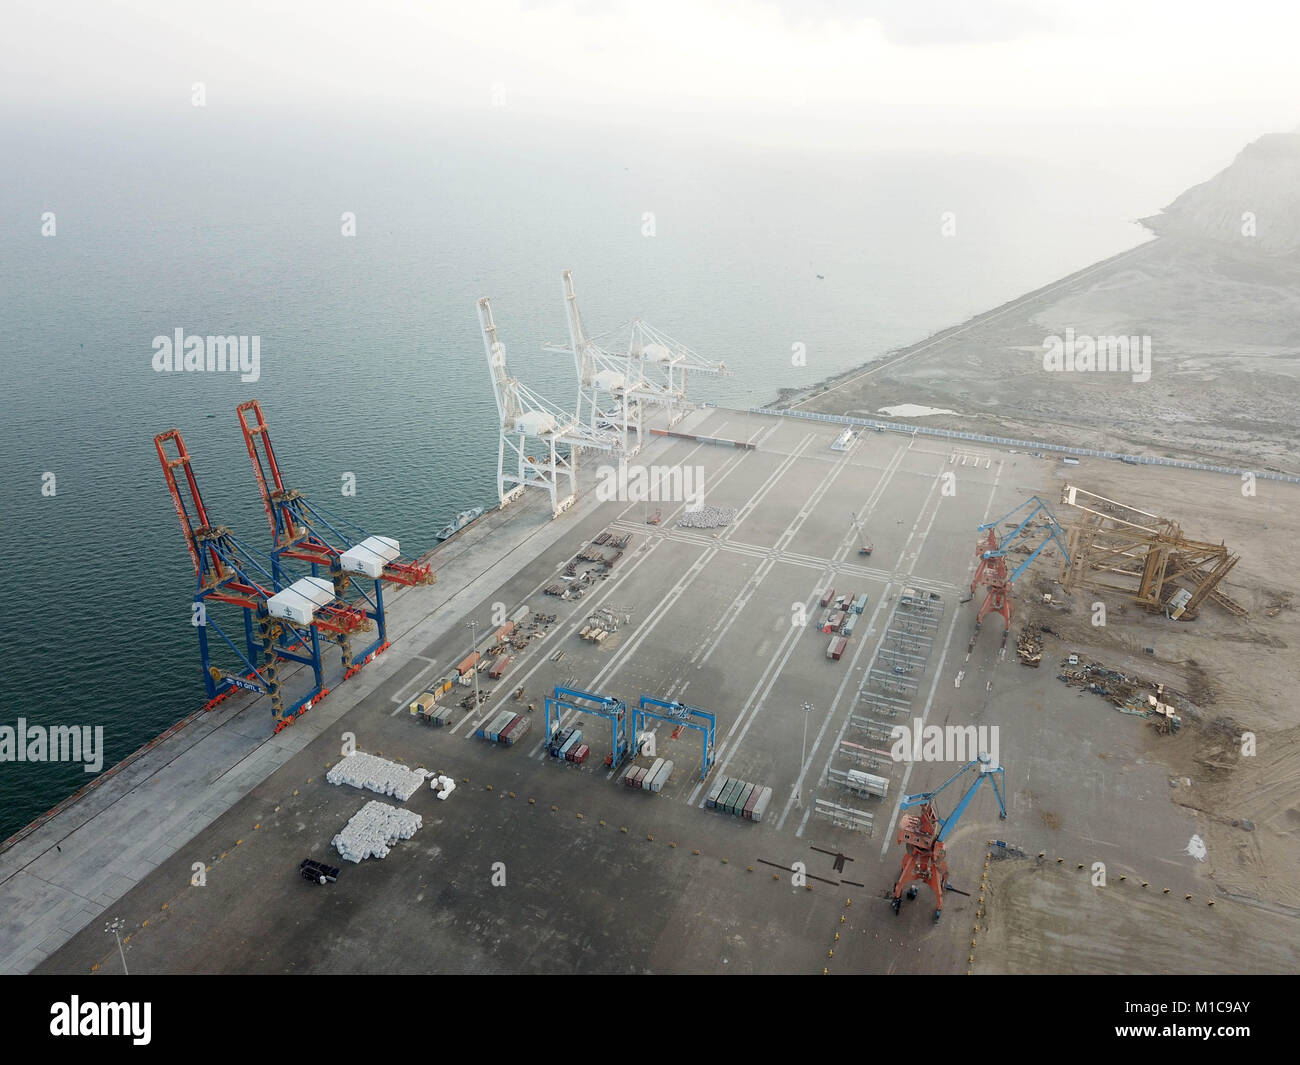 (180129) -- GWADAR, Jan. 29, 2018 (Xinhua) -- Photo taken on Jan. 29, 2018 shows a view of Gwadar port in southwest Pakistan's Gwadar. The first phase of Gwadar Port's Free Zone in southwestern Pakistan was inaugurated on Monday by Prime Minister Shahid Khaqan Abbasi, who commented that the free zone would help facilitate regional and global trade under the China-Pakistan Economic Corridor (CPEC). (Xinhua/Ahmad Kamal) (psw) Stock Photo